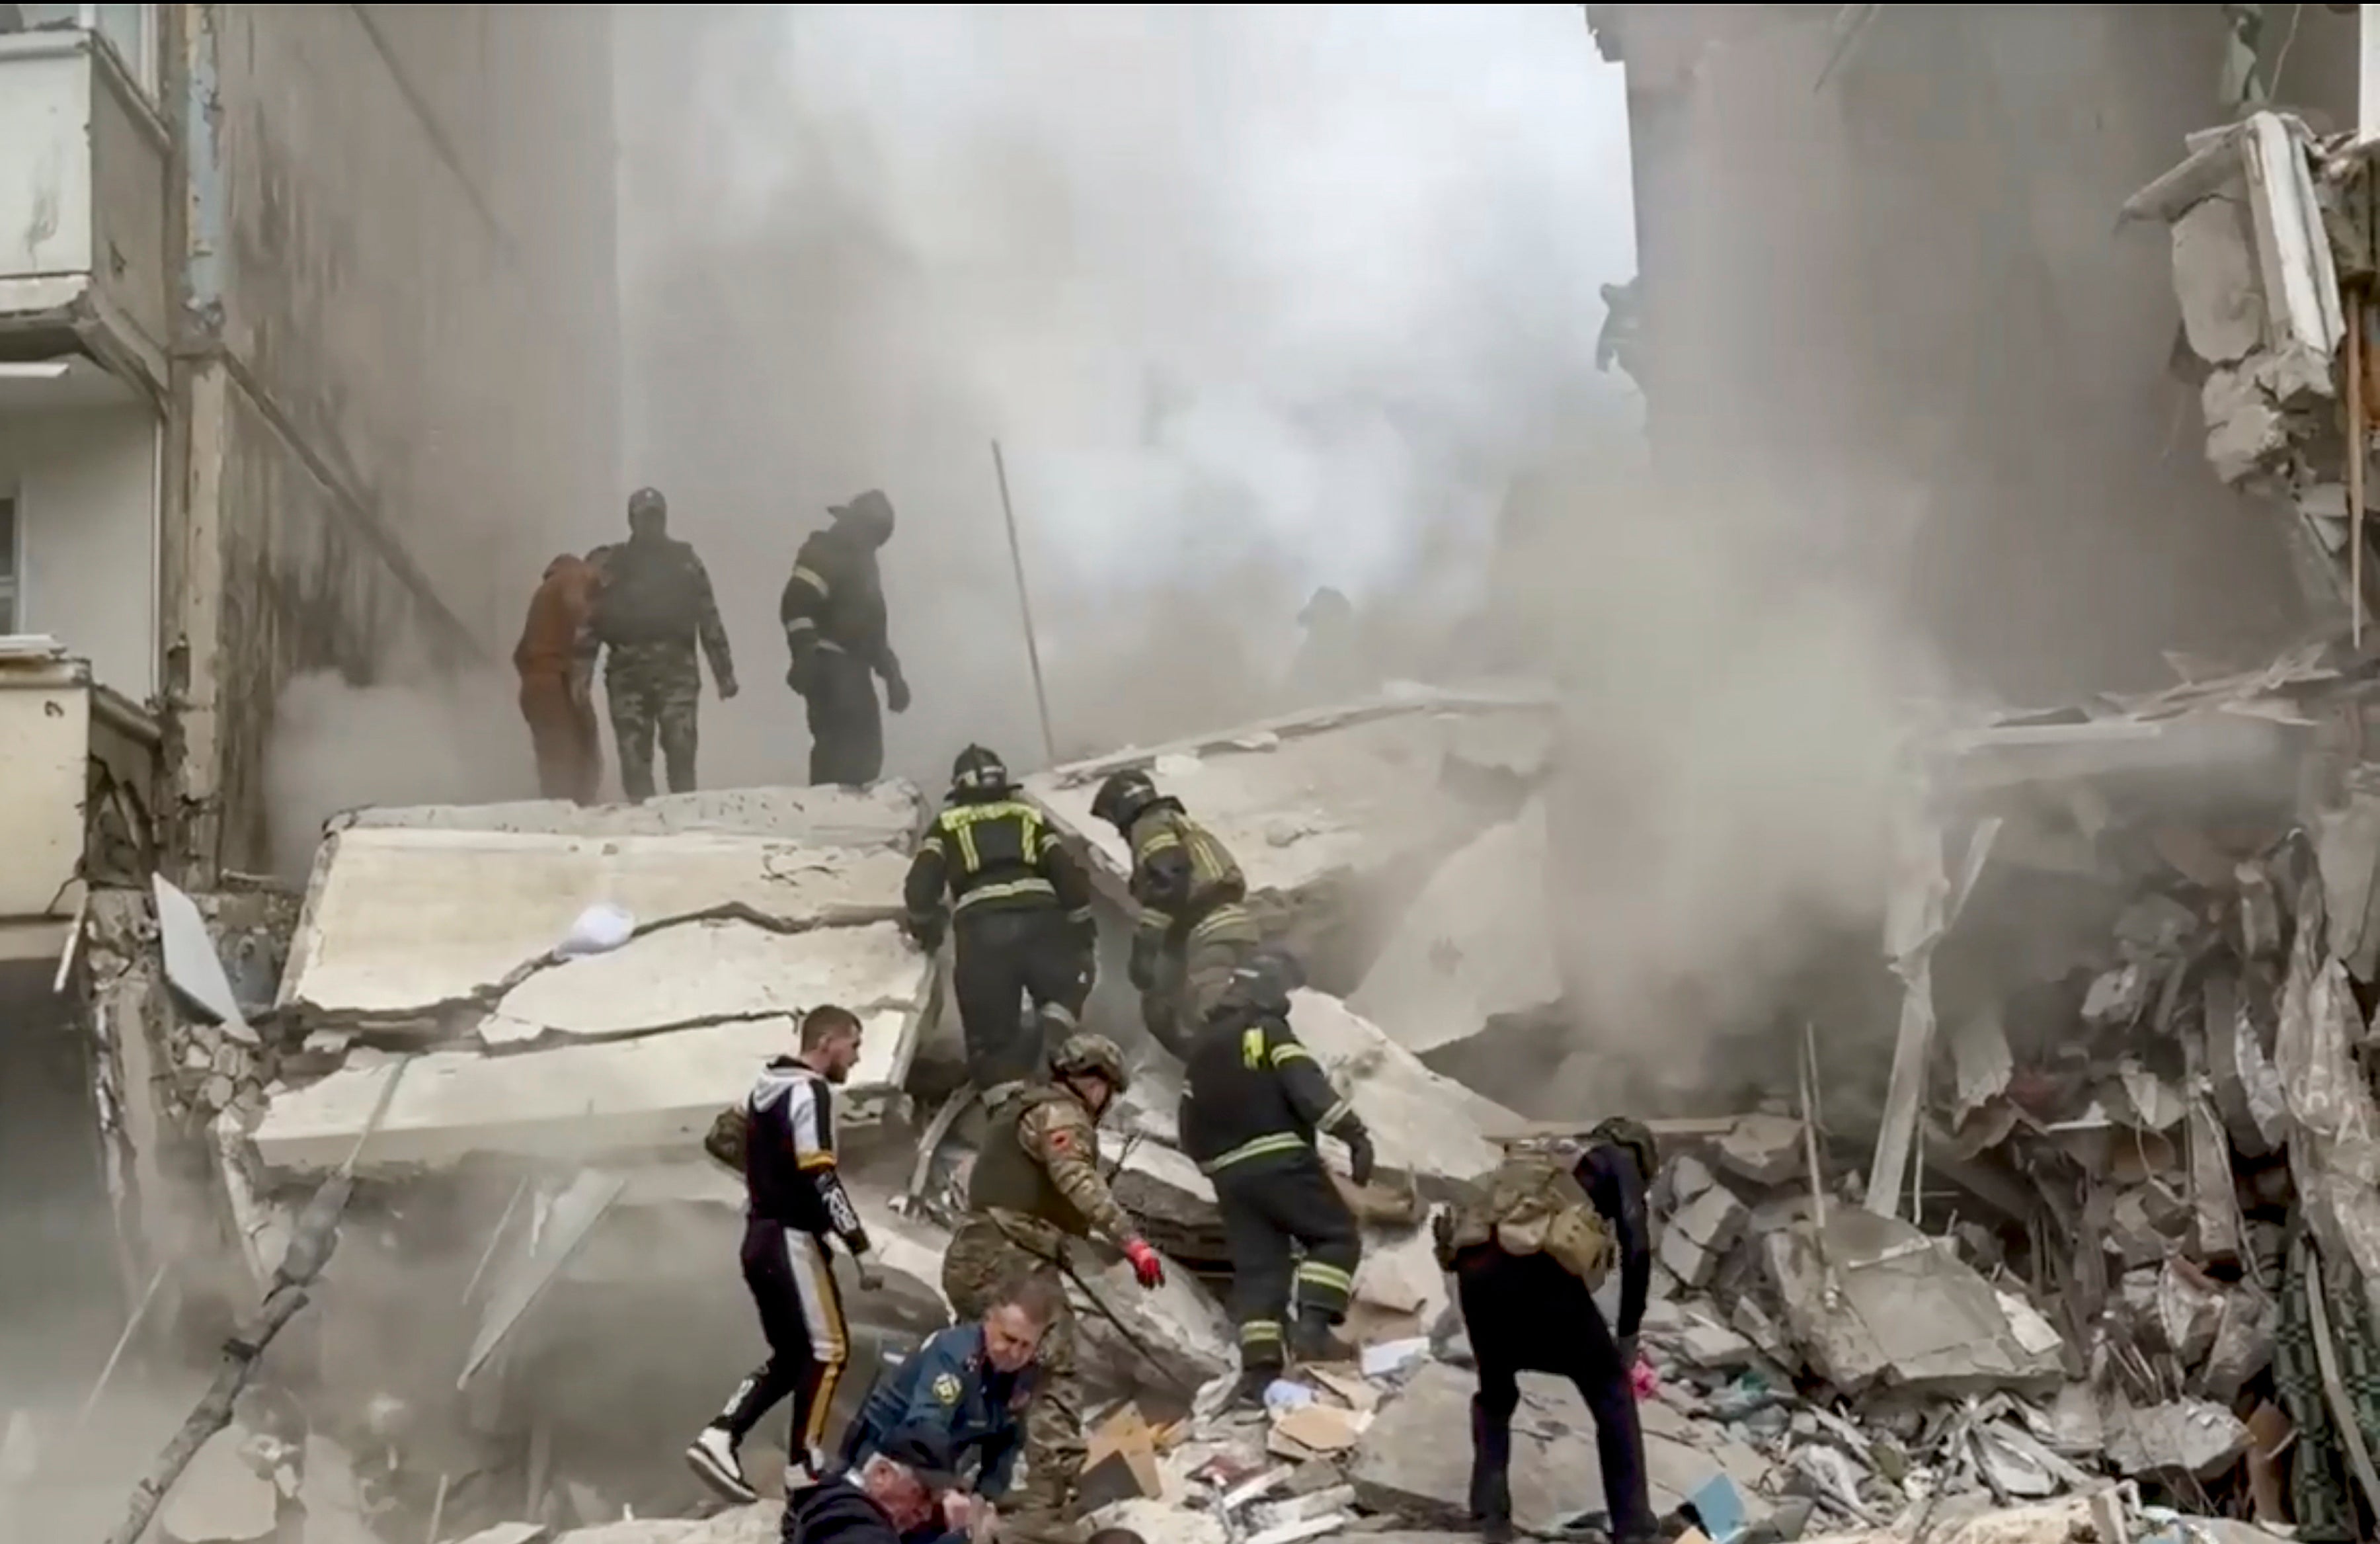 Russian rescuers search for survivors in the rubble after the roof of a destroyed apartment block in Belgorod collapsed onto emergency workers